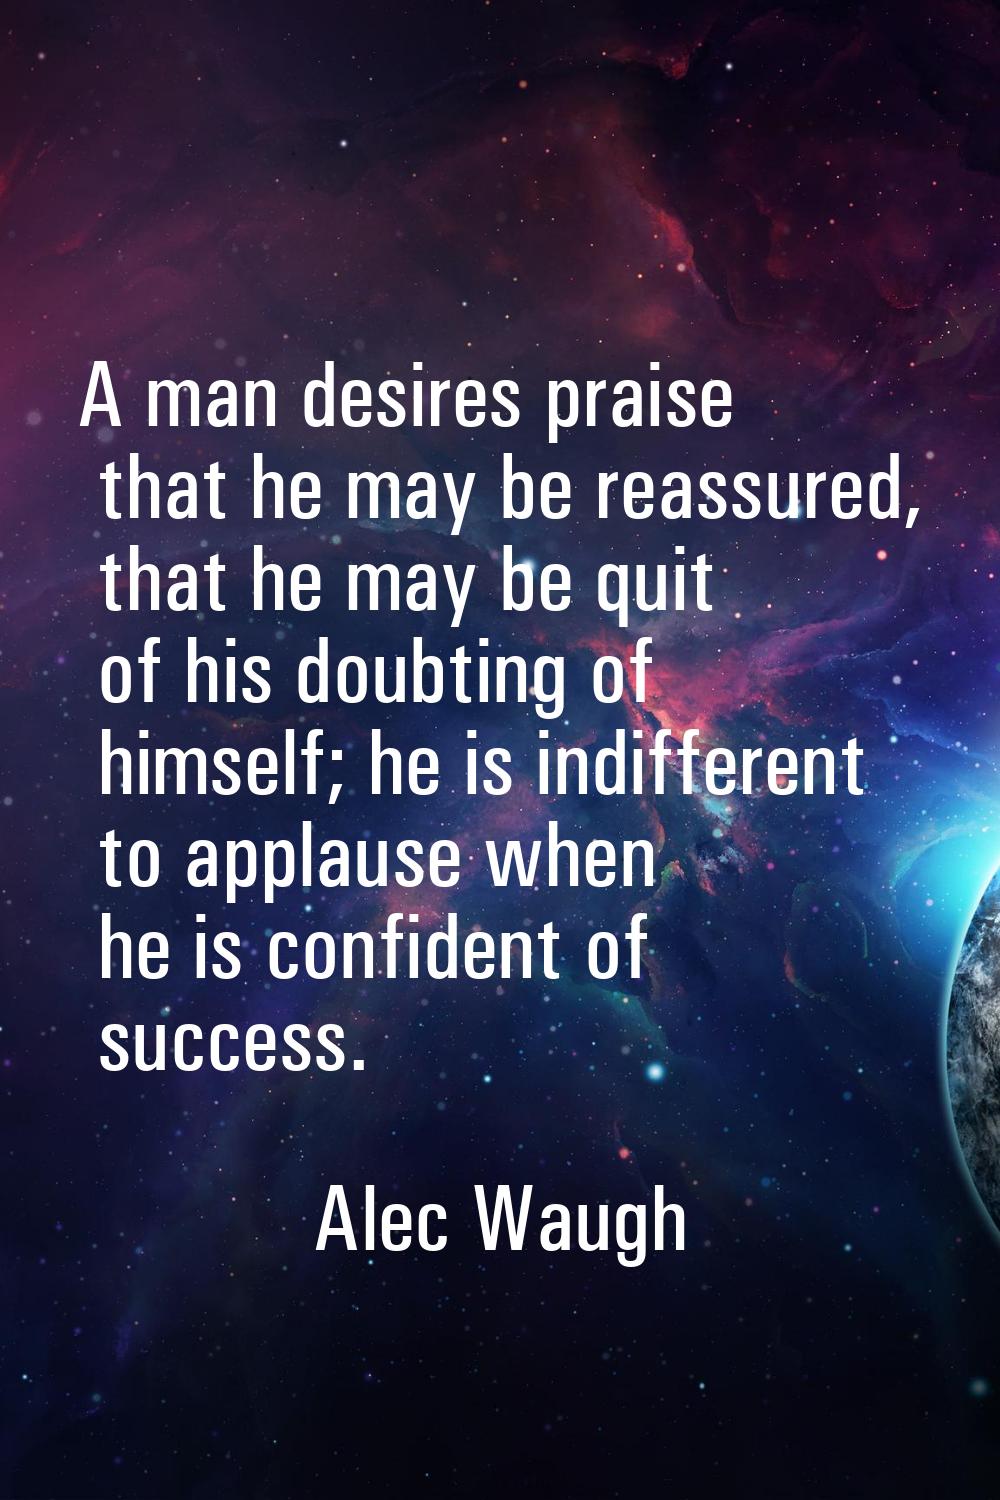 A man desires praise that he may be reassured, that he may be quit of his doubting of himself; he i